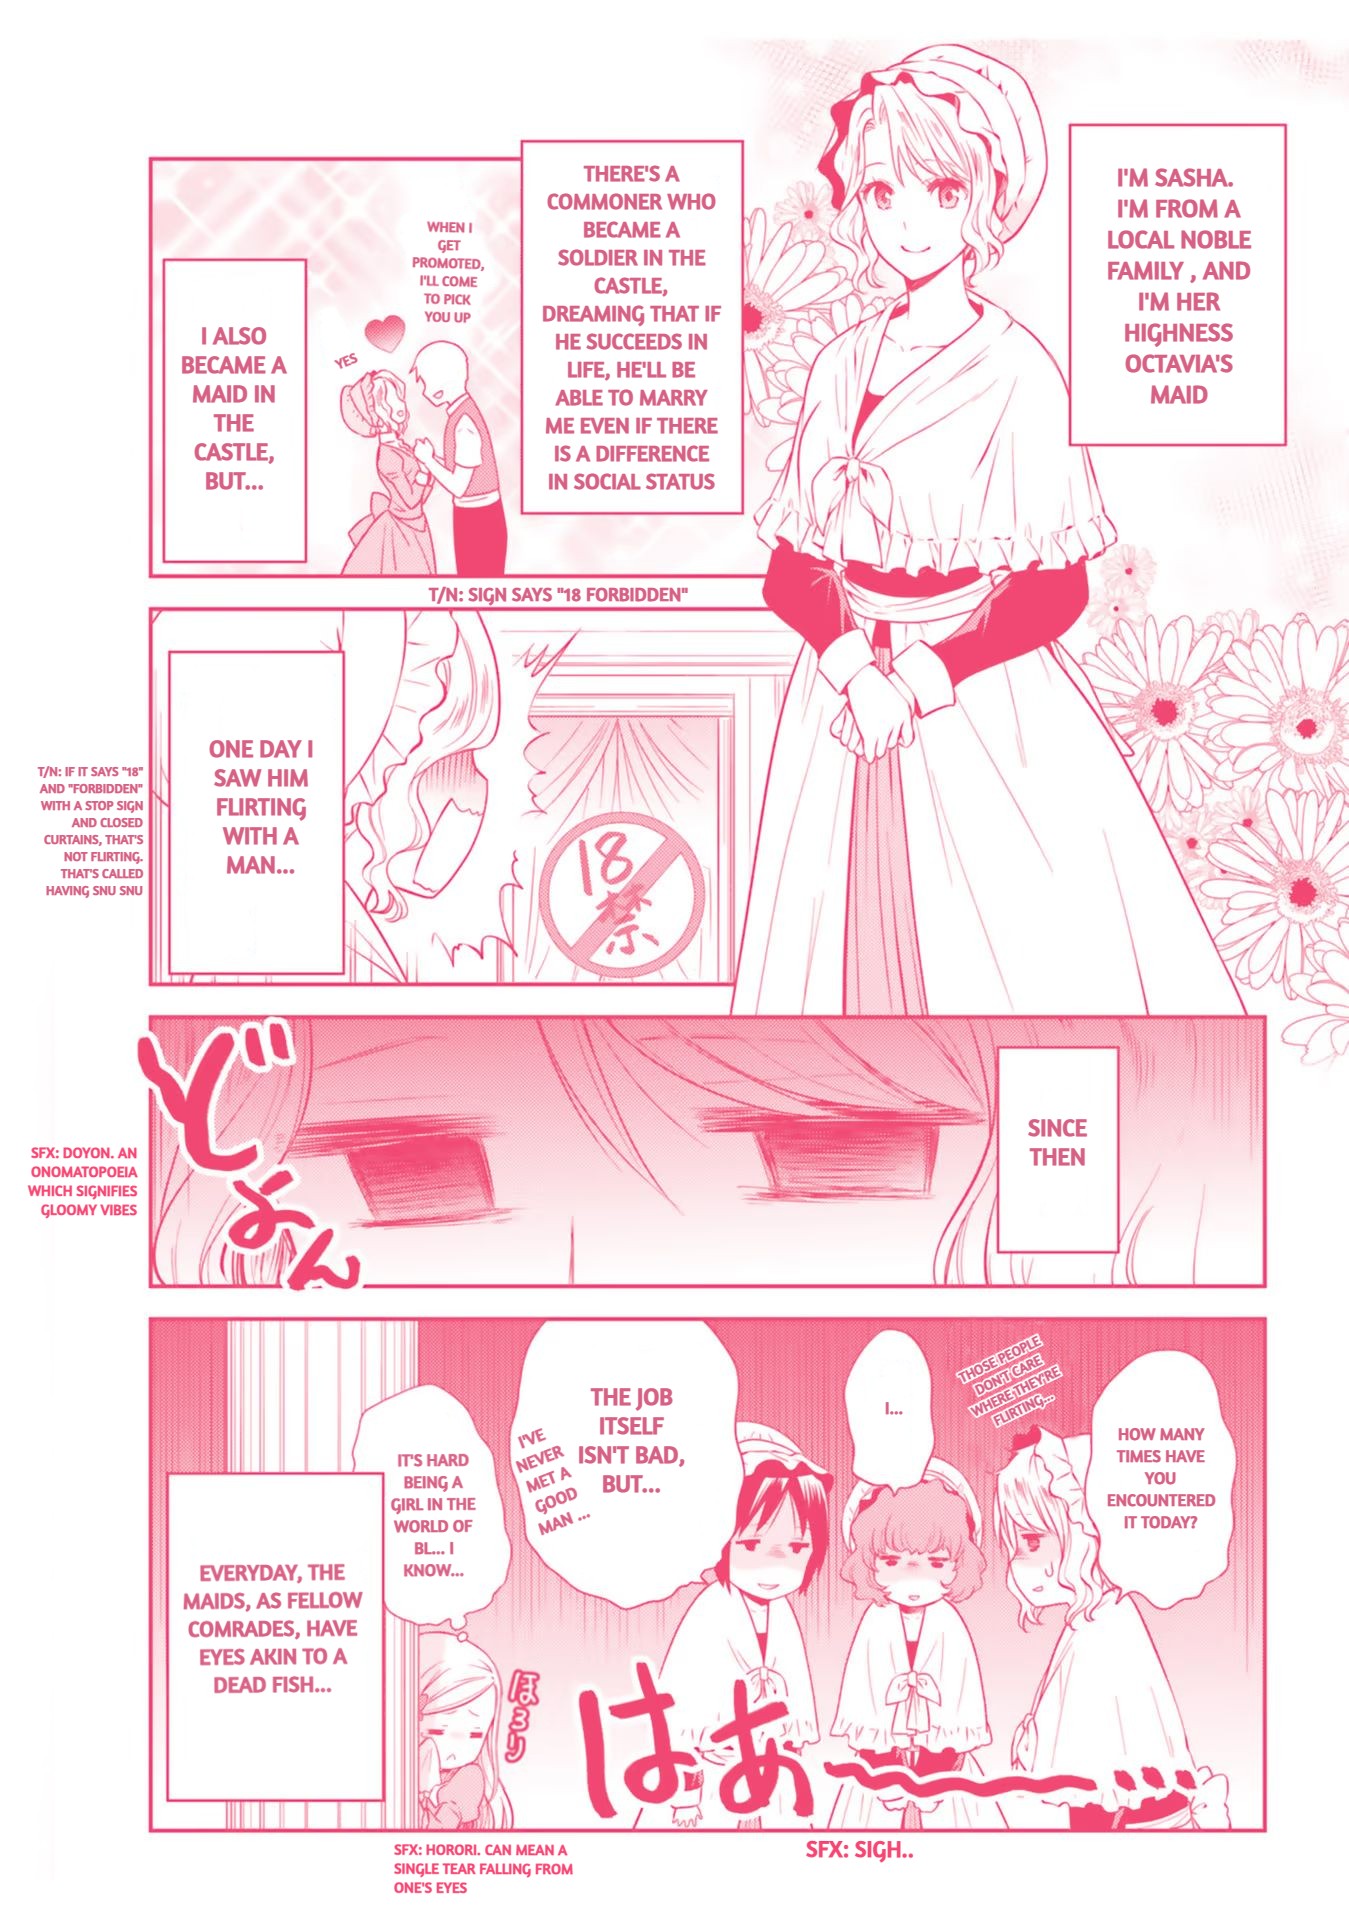 I'm An Opportunistic Princess In-Charge Of Solving Things Vol.4 Chapter 21.5: Side Story - Volume 4 - Picture 3